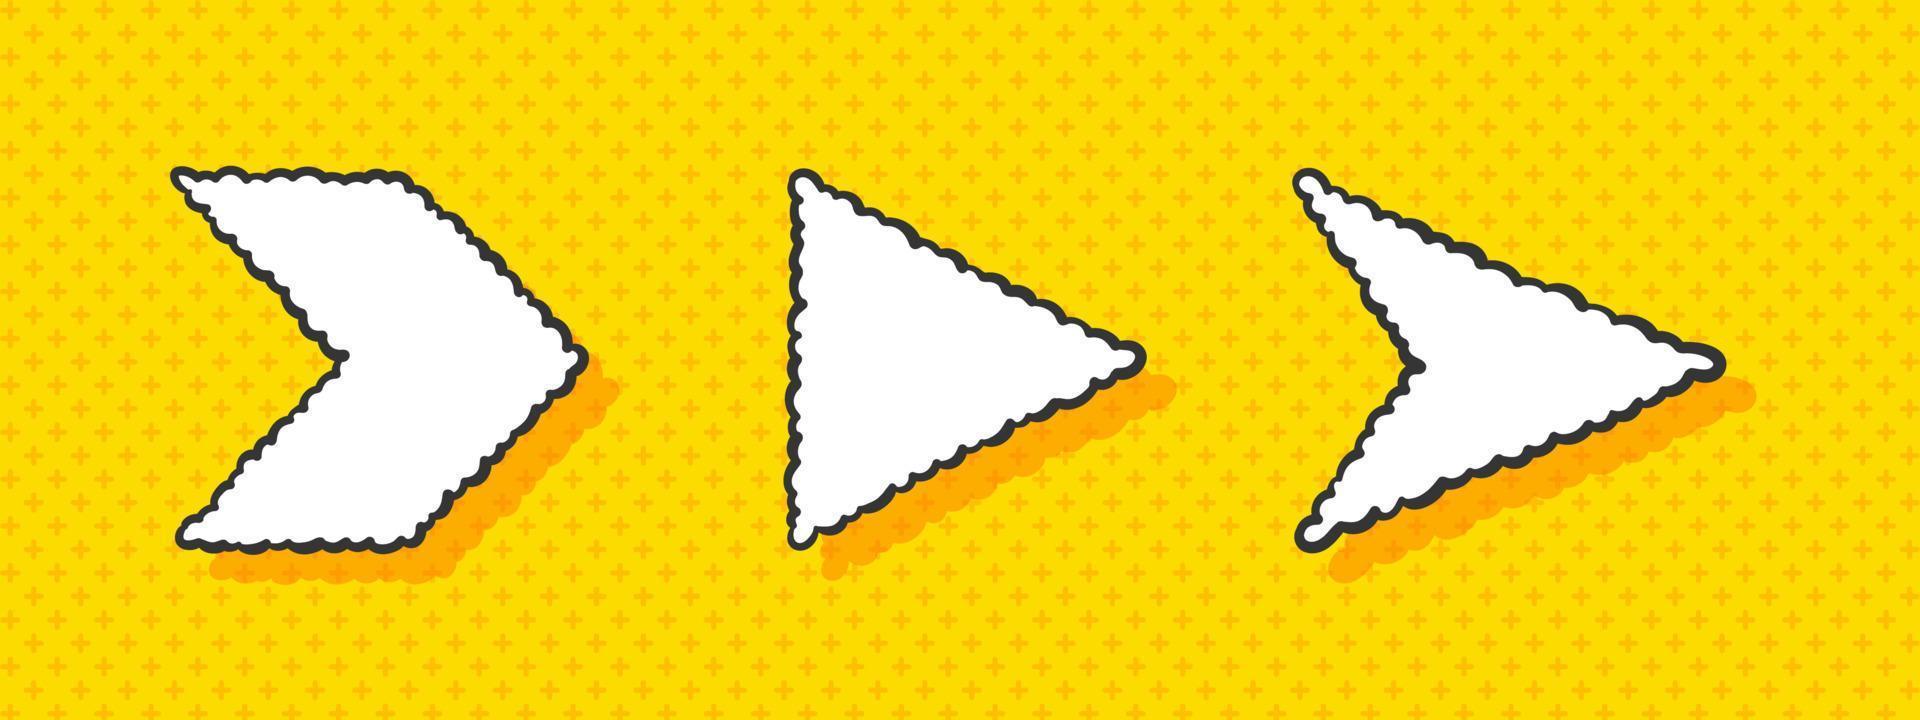 Arrows speech bubbles. Hand drawn arrows icons on yellow background. Vector illustration